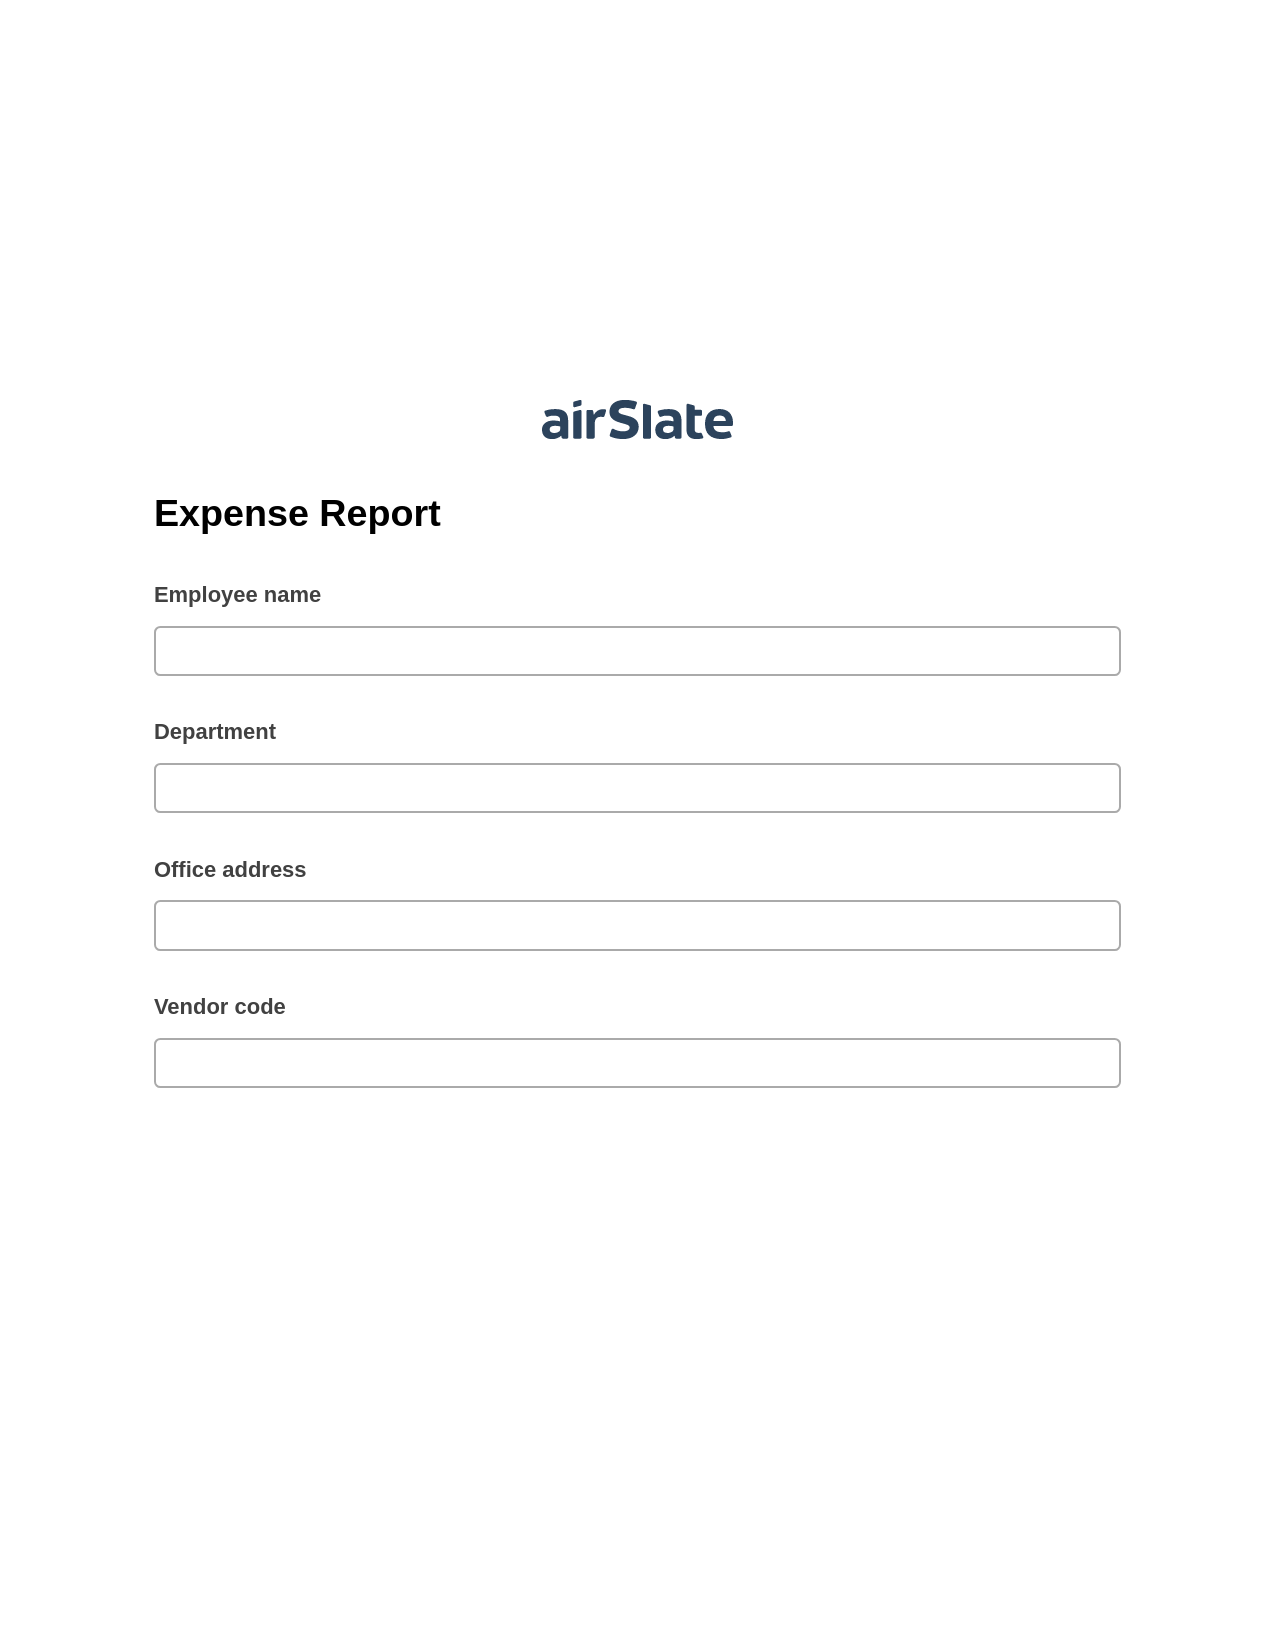 Expense Report Pre-fill Slate from MS Dynamics 365 Records Bot, Pre-fill with Custom Data Bot, Export to Excel 365 Bot